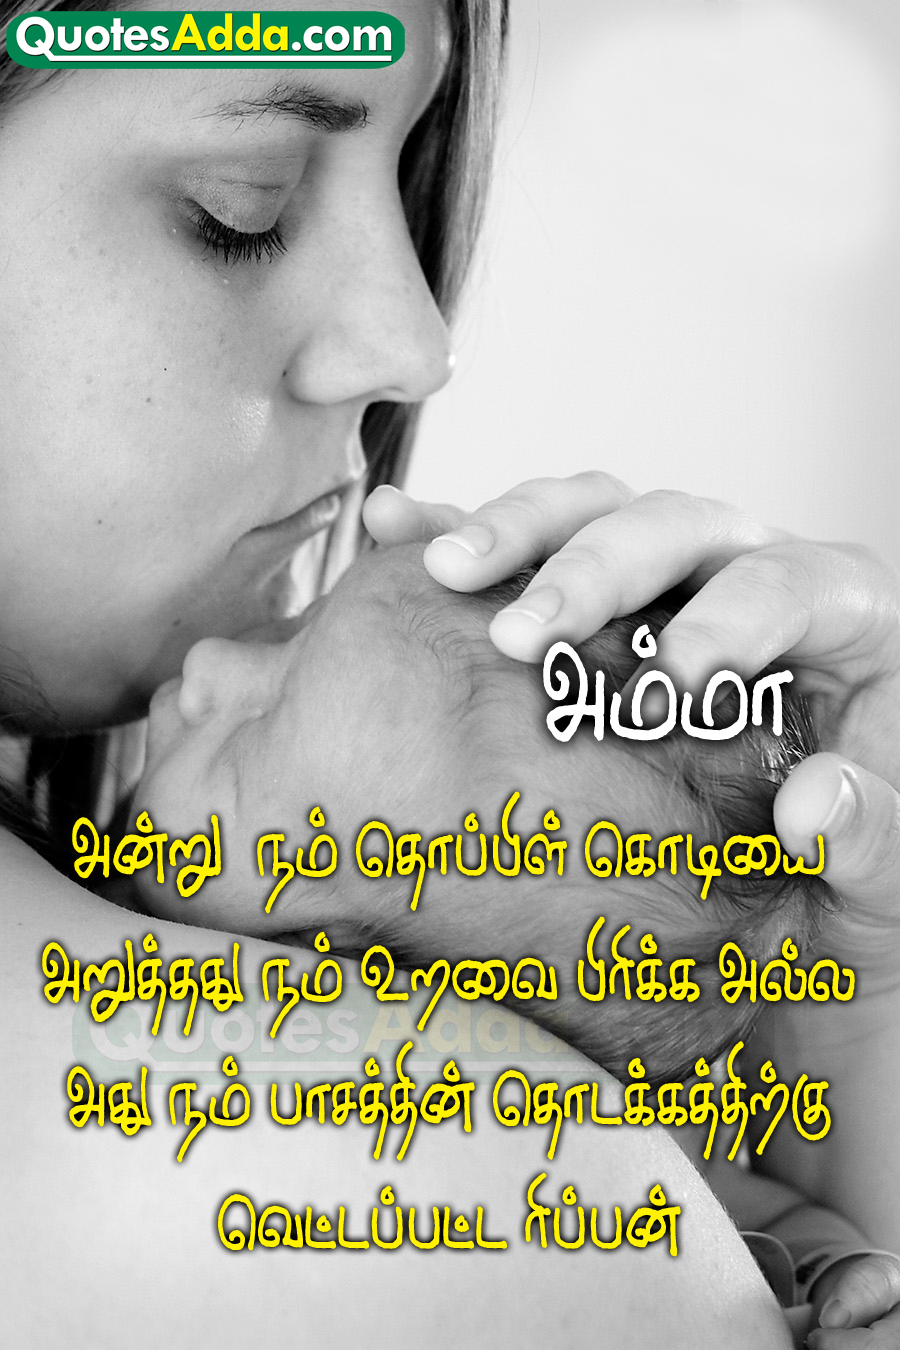 Tamil Inspirational Quotes About Mother Quotesgram